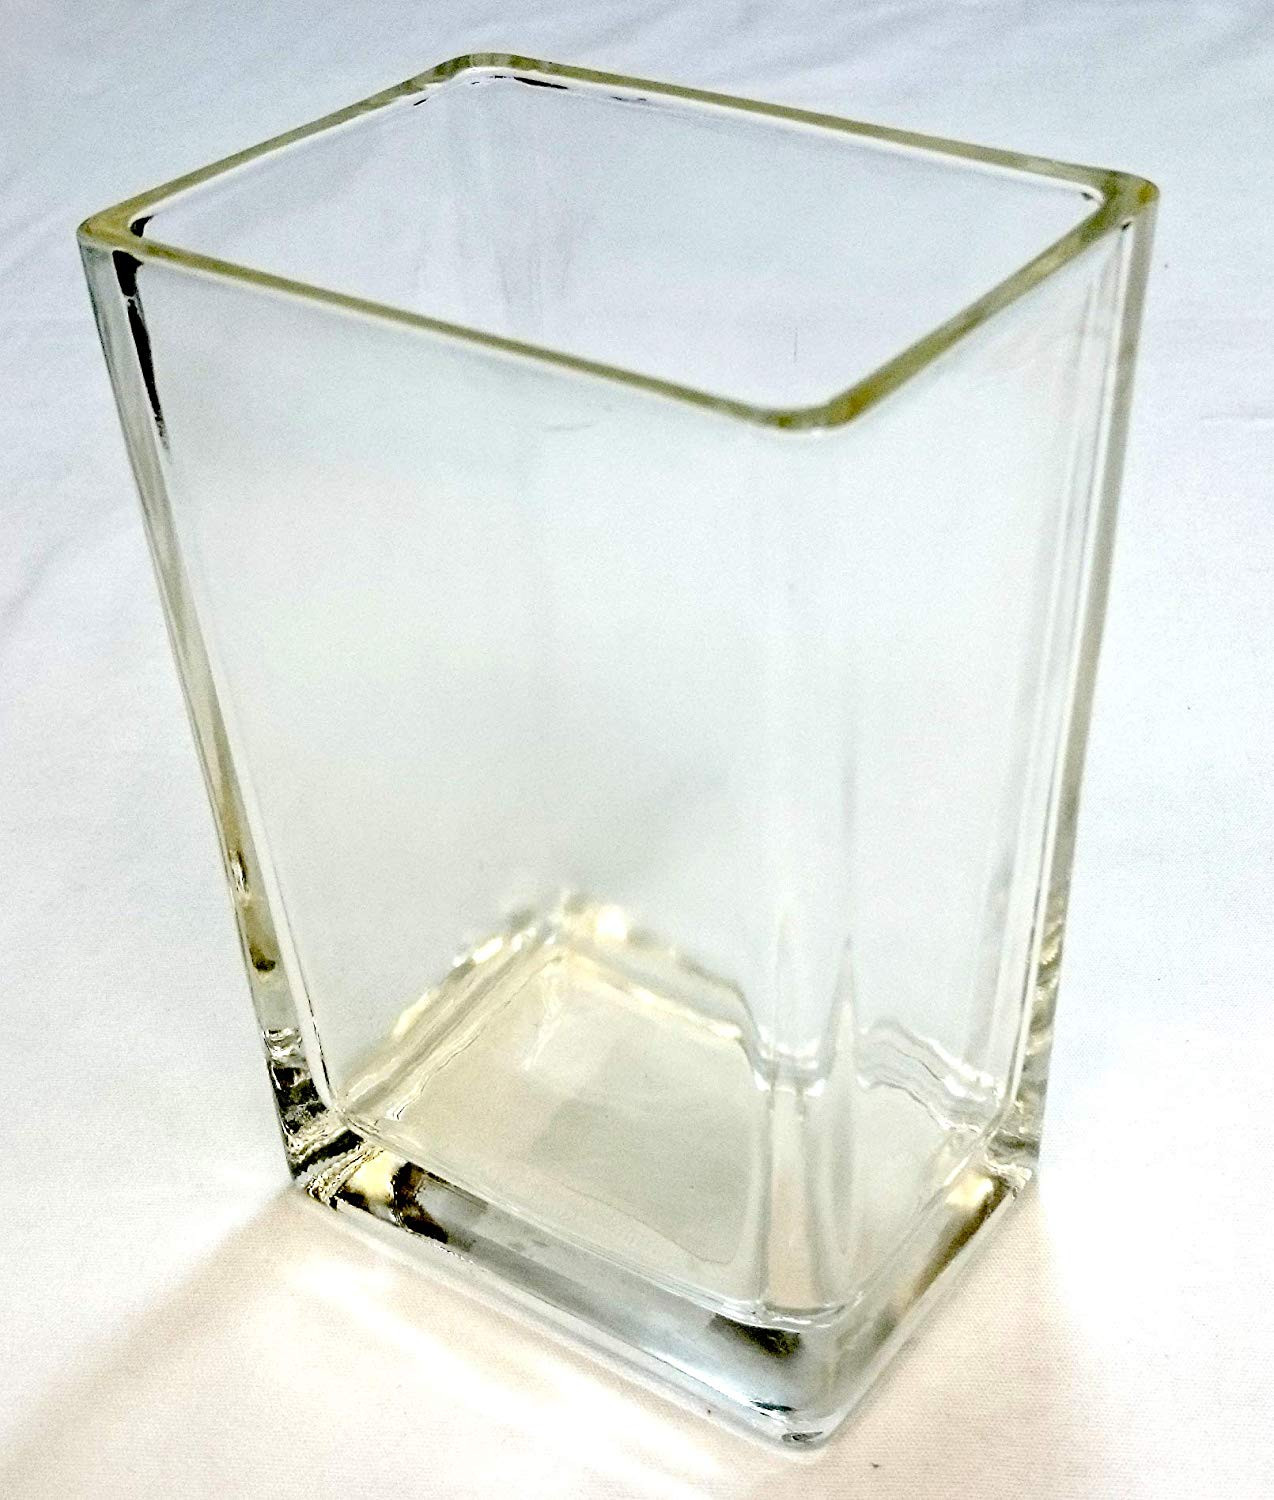 12 inch clear cylinder vase of amazon com concord global trading 6 rectangle 3x4 base glass vase with regard to amazon com concord global trading 6 rectangle 3x4 base glass vase six inch high tapered clear pillar centerpiece 6x4x3 candleholder home kitchen